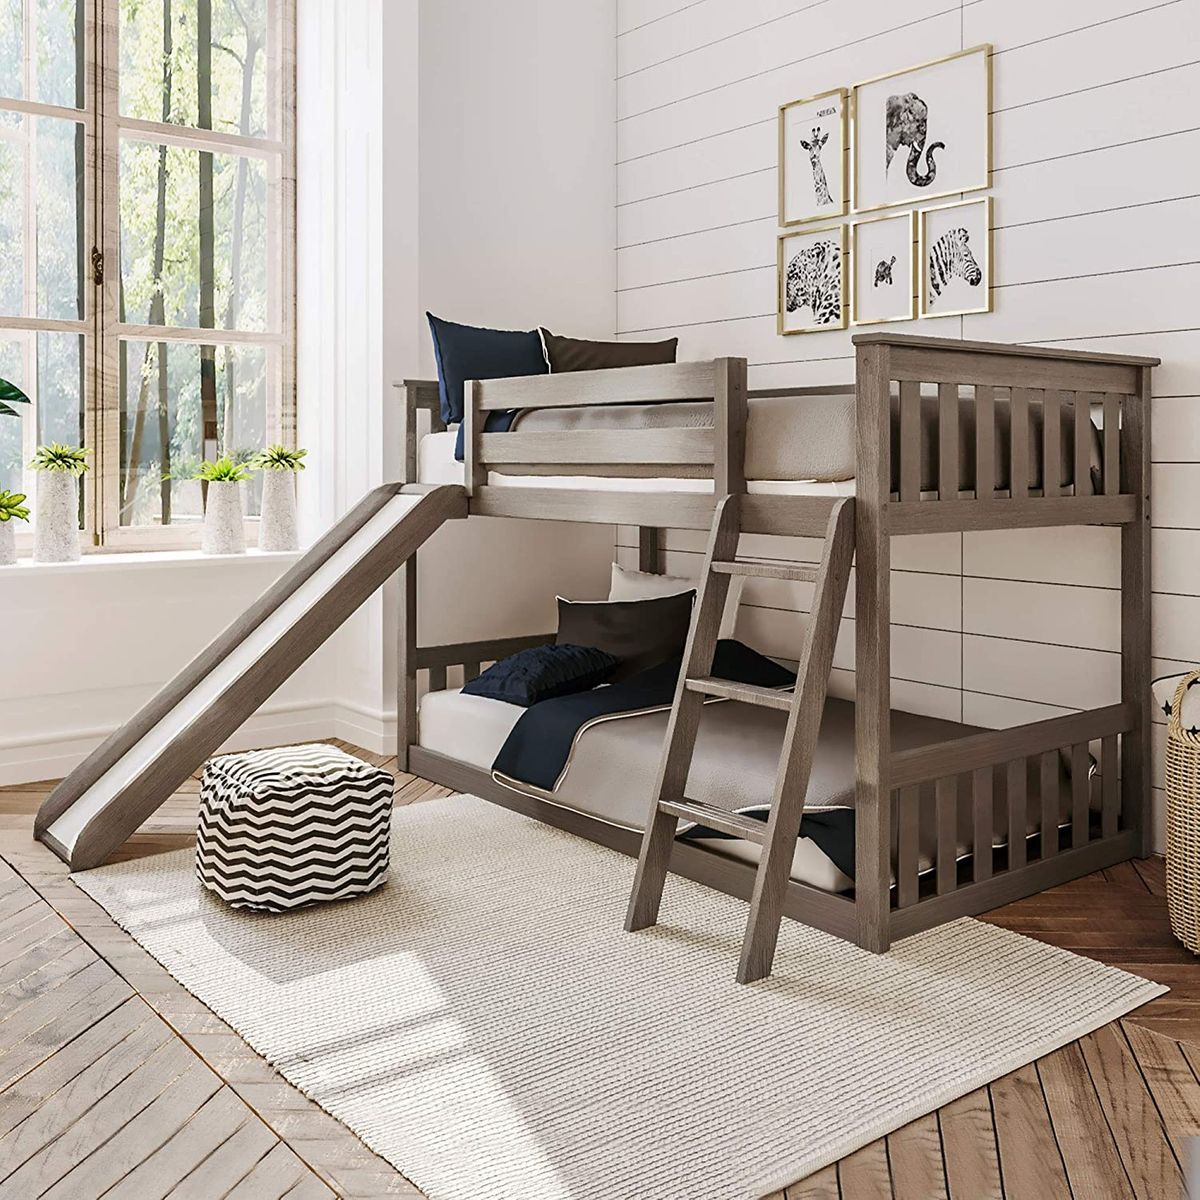 8 Best Bunk Beds 2022 The Strategist, Bunk Beds With Desk Underneath Costco